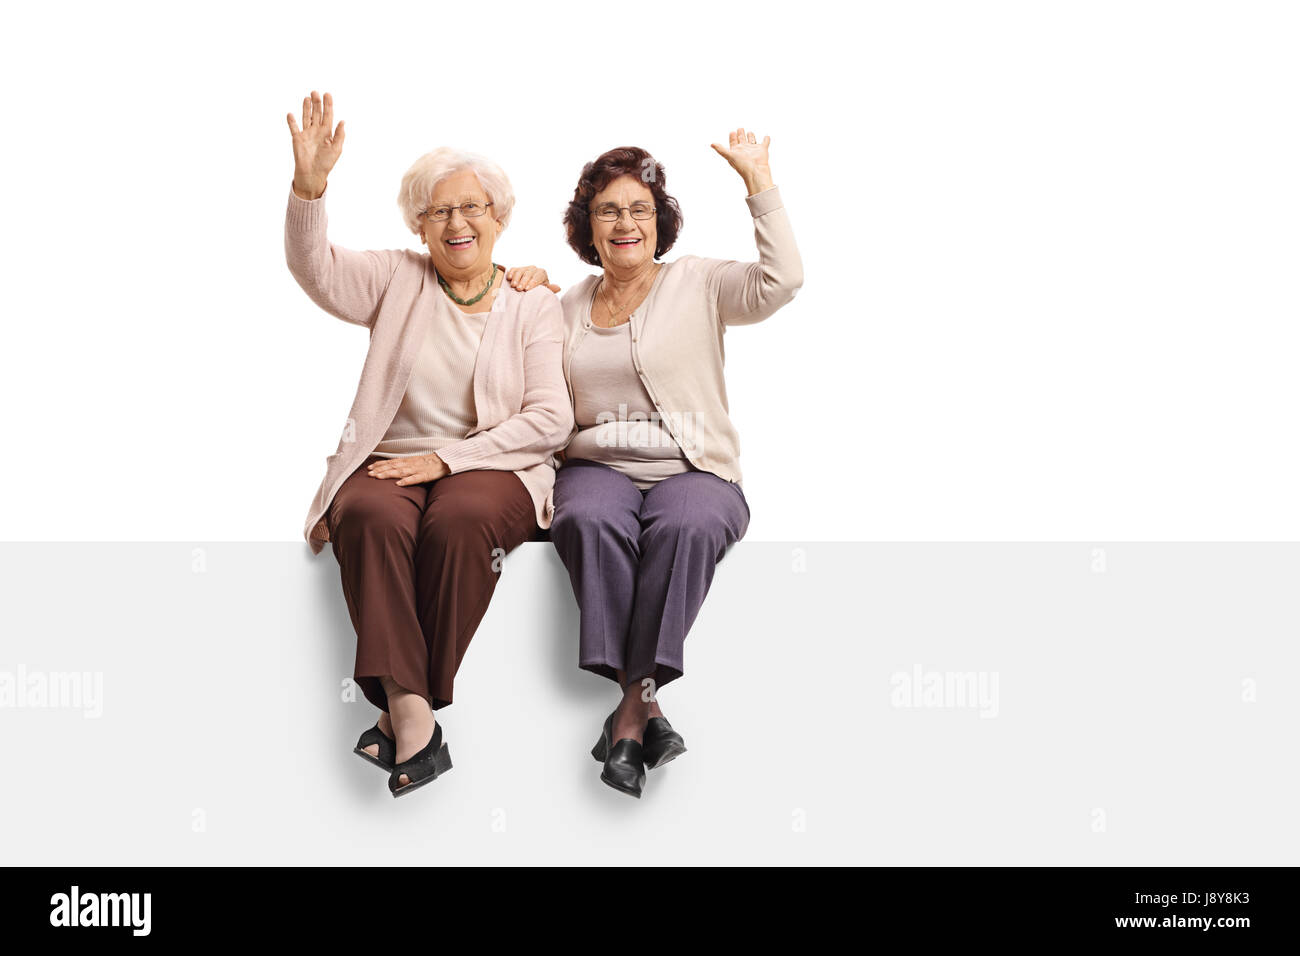 Two cheerful mature women sitting on a panel and waving isolated on white background Stock Photo